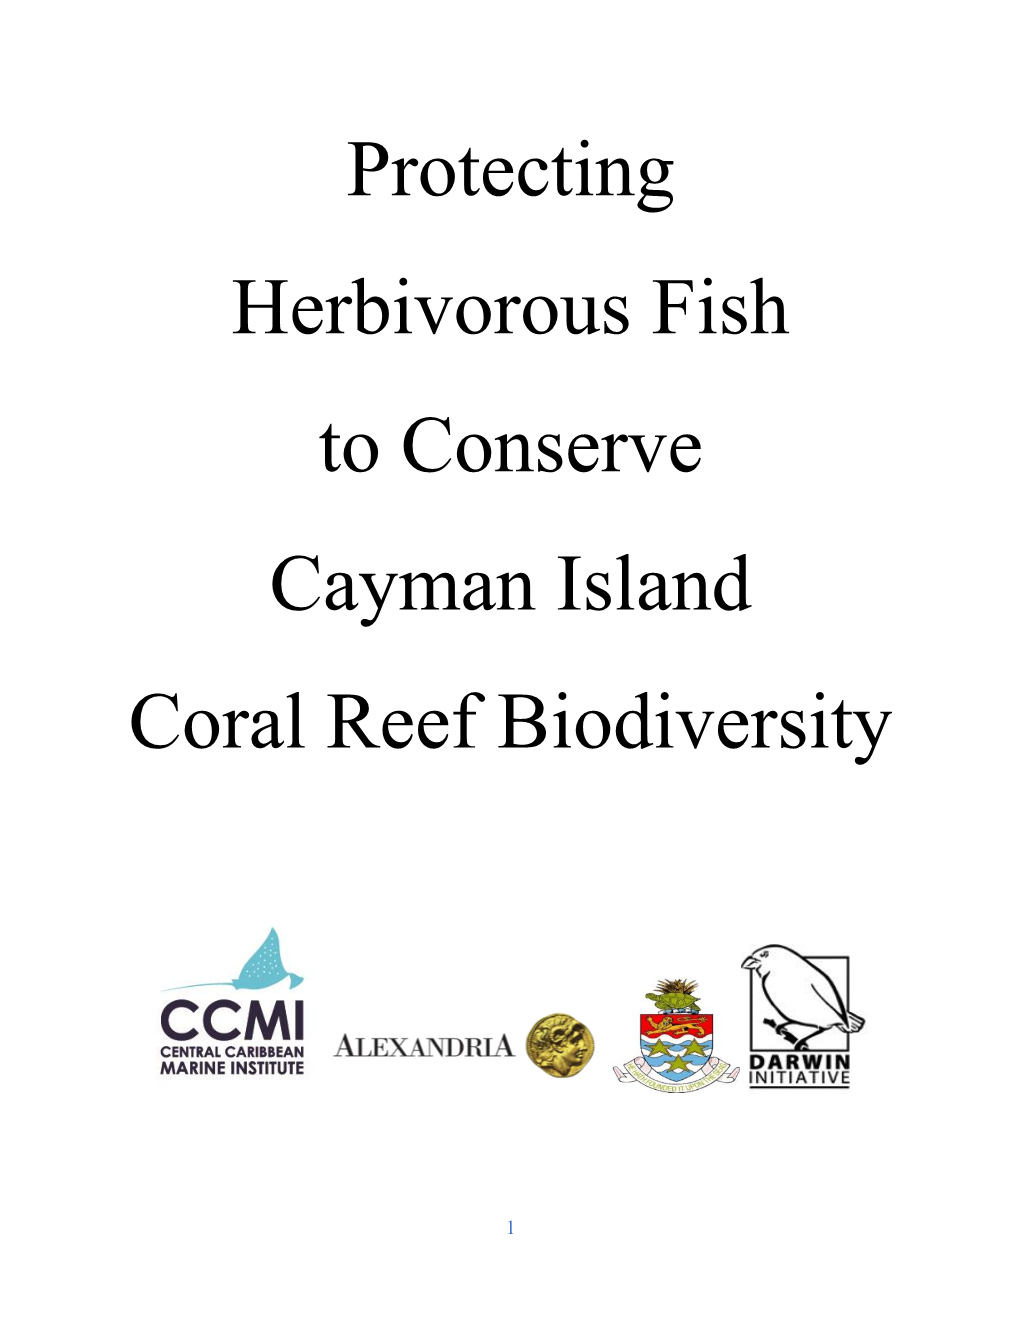 Protecting Herbivorous Fish to Conserve Cayman Island Coral Reef Biodiversity